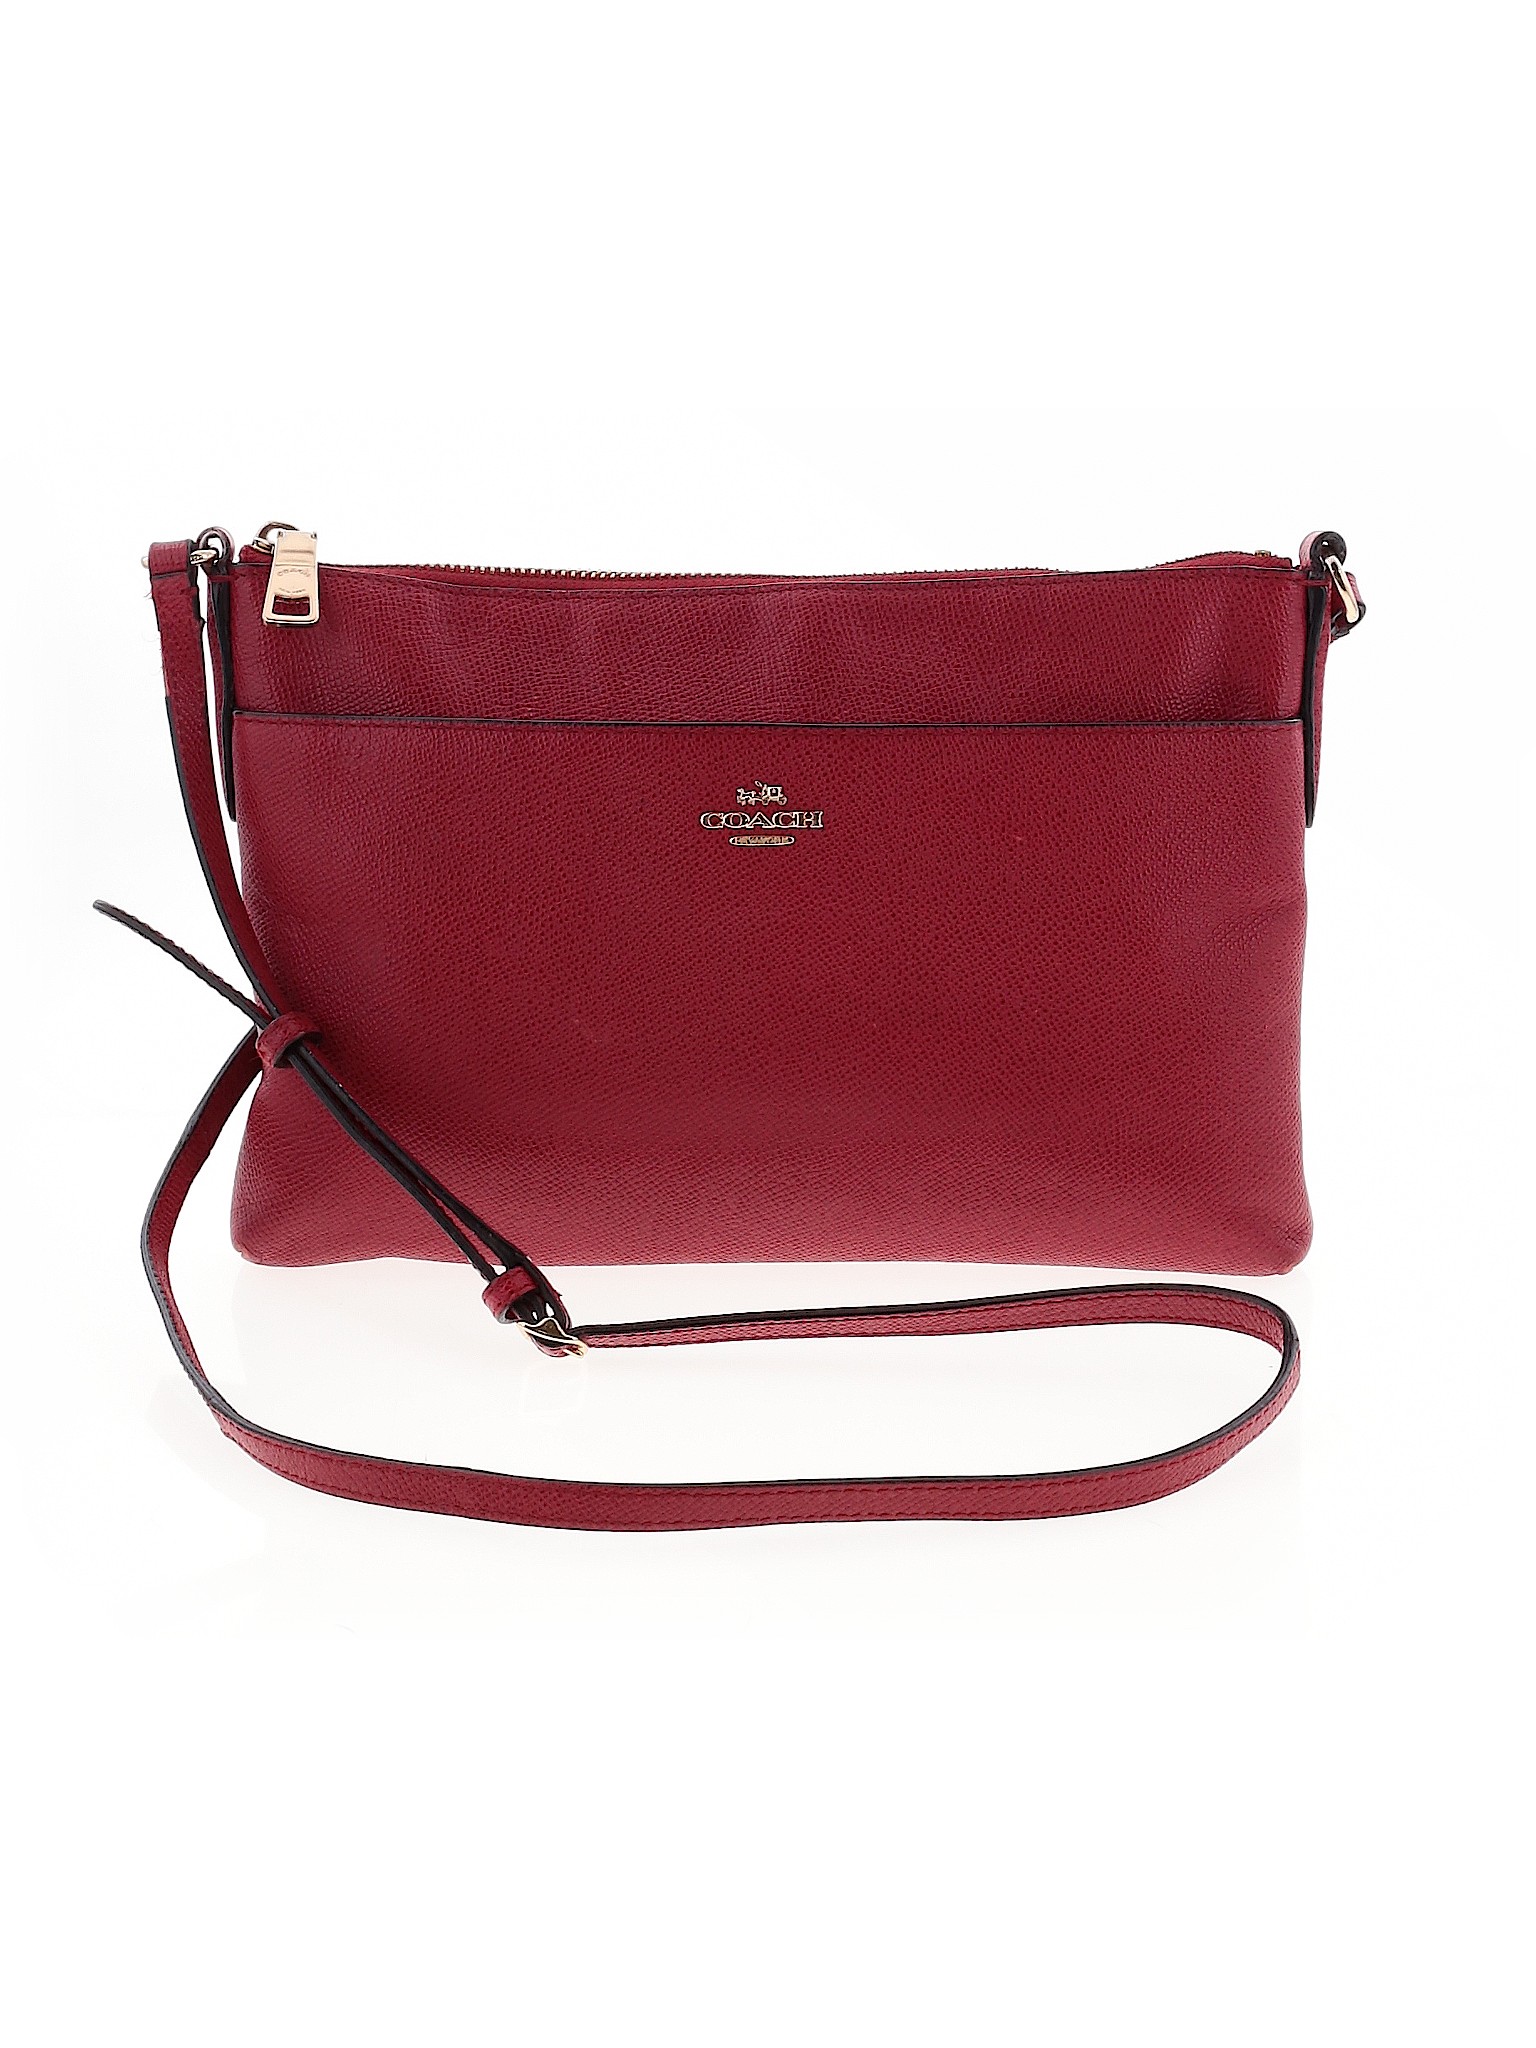 Coach Solid Red Crossbody Bag One Size - 75% off | thredUP